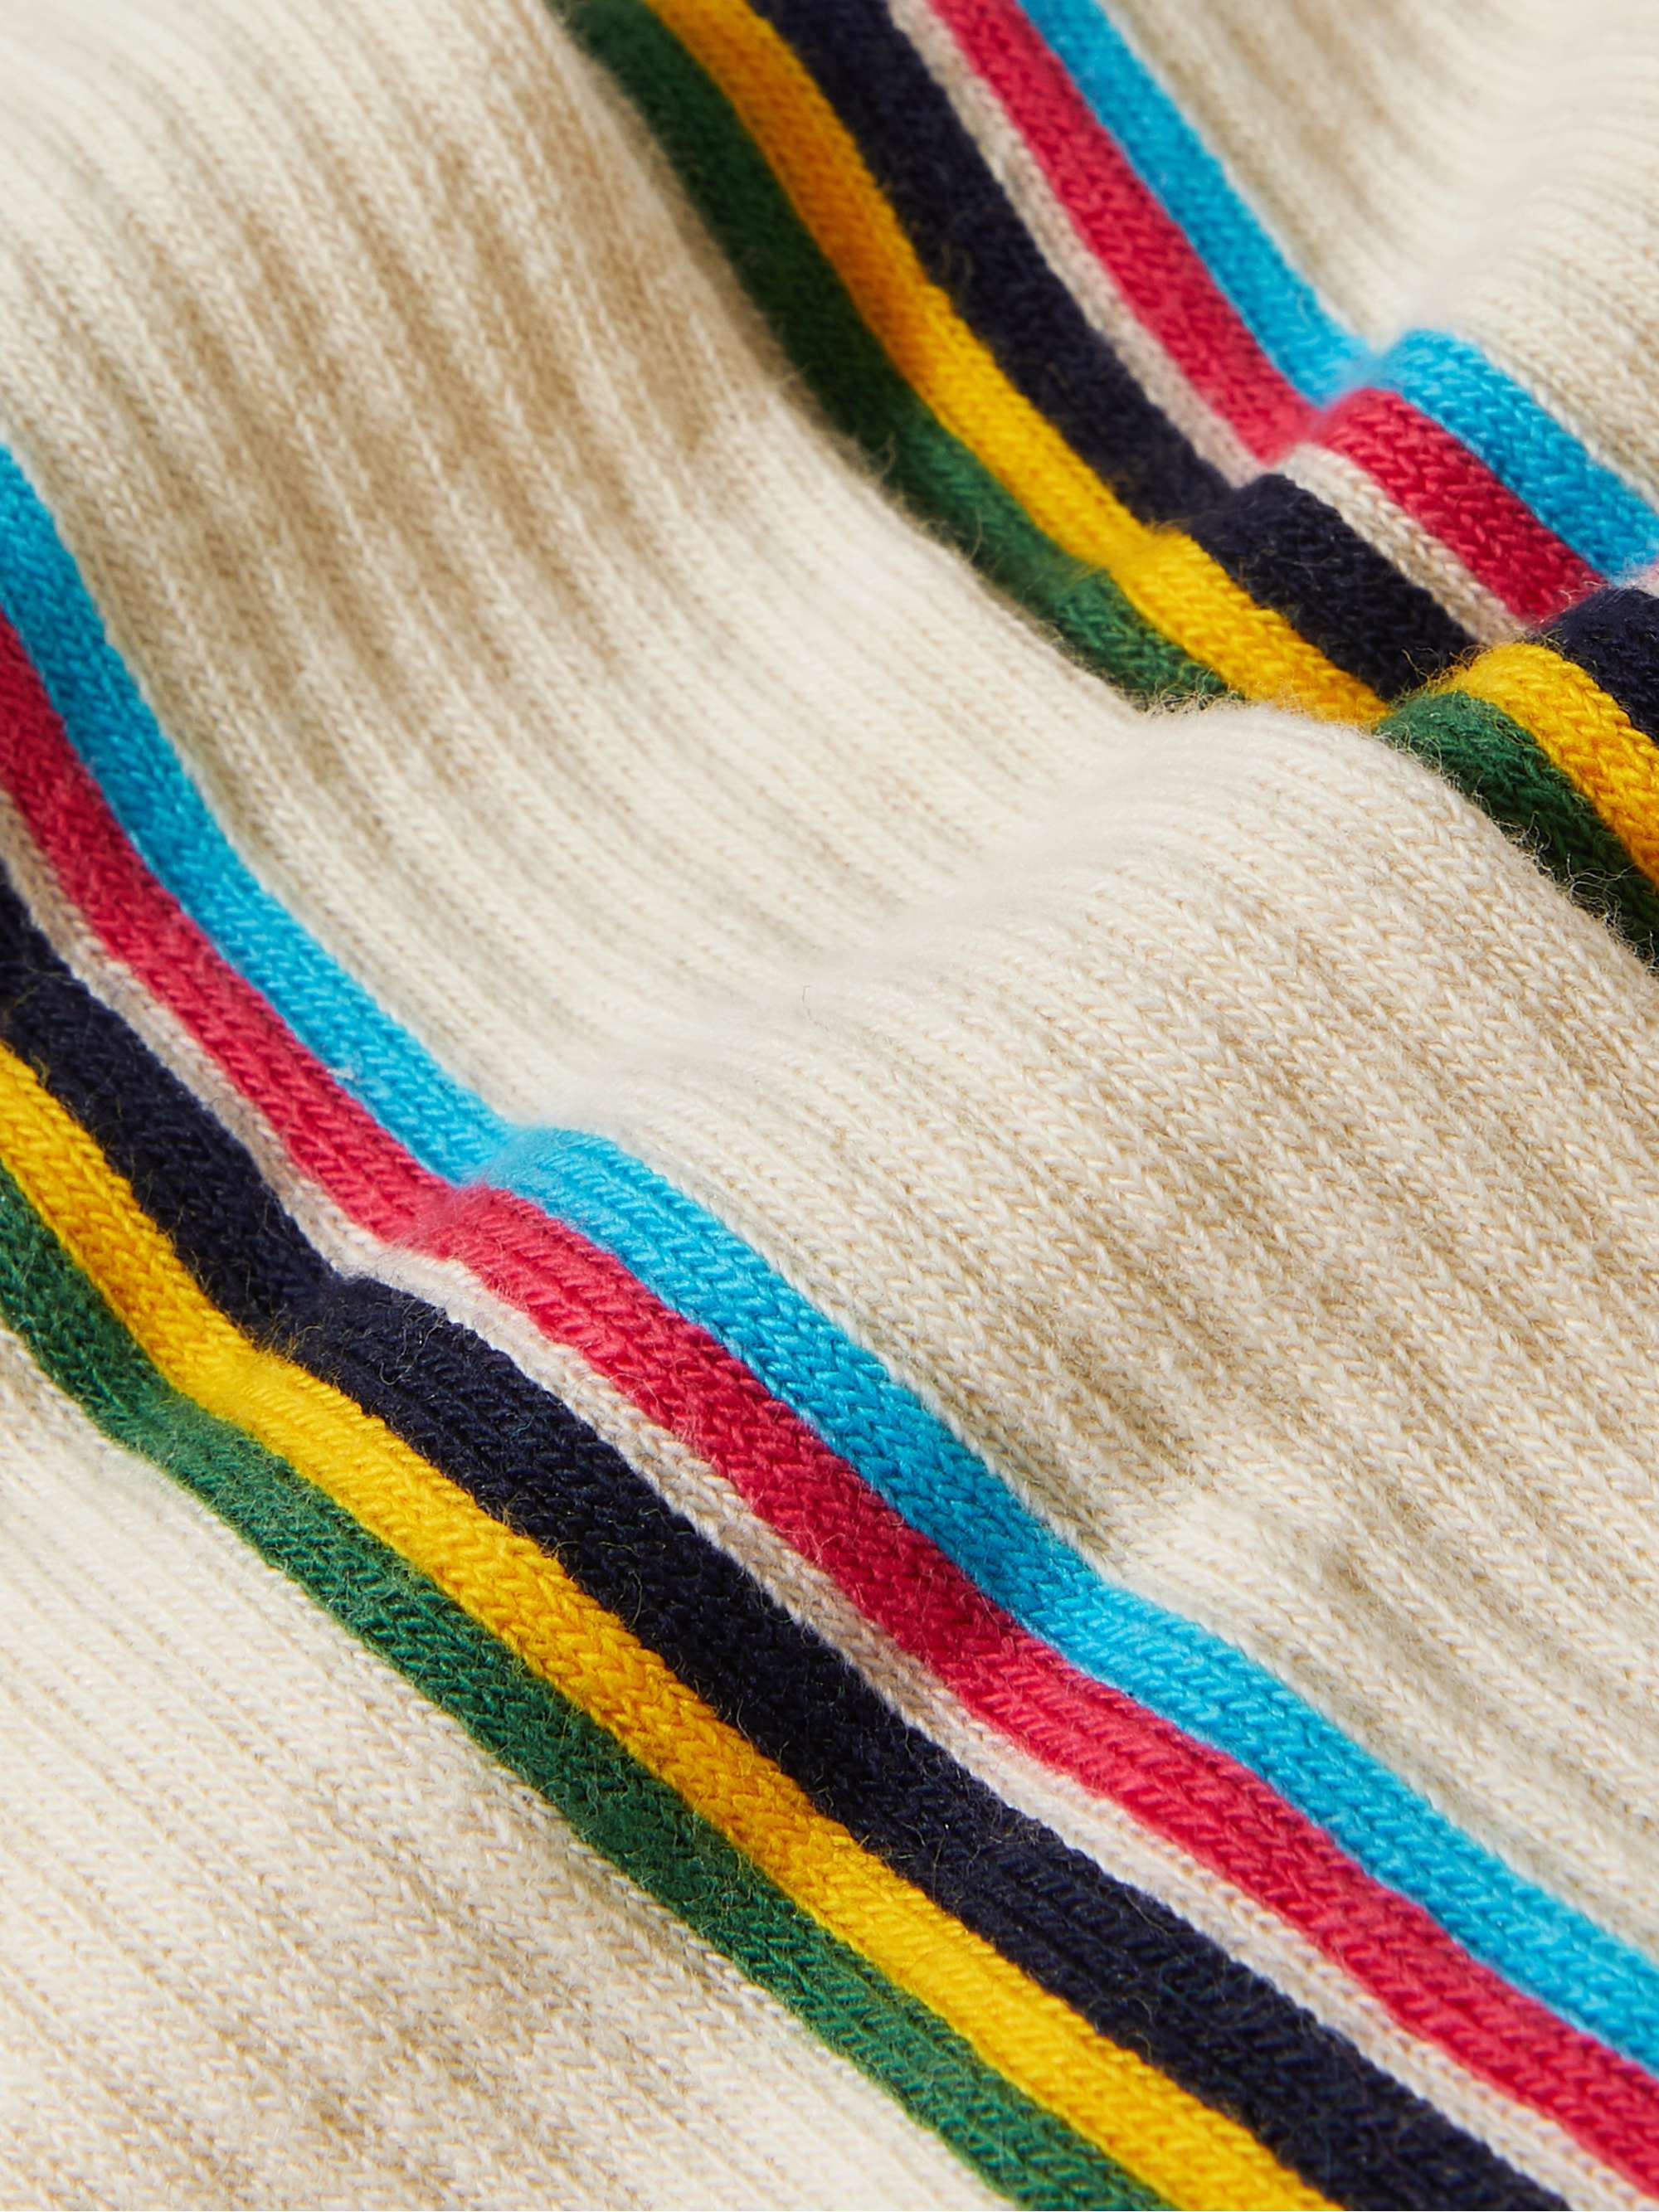 PAUL SMITH Striped Ribbed Cotton-Blend Socks